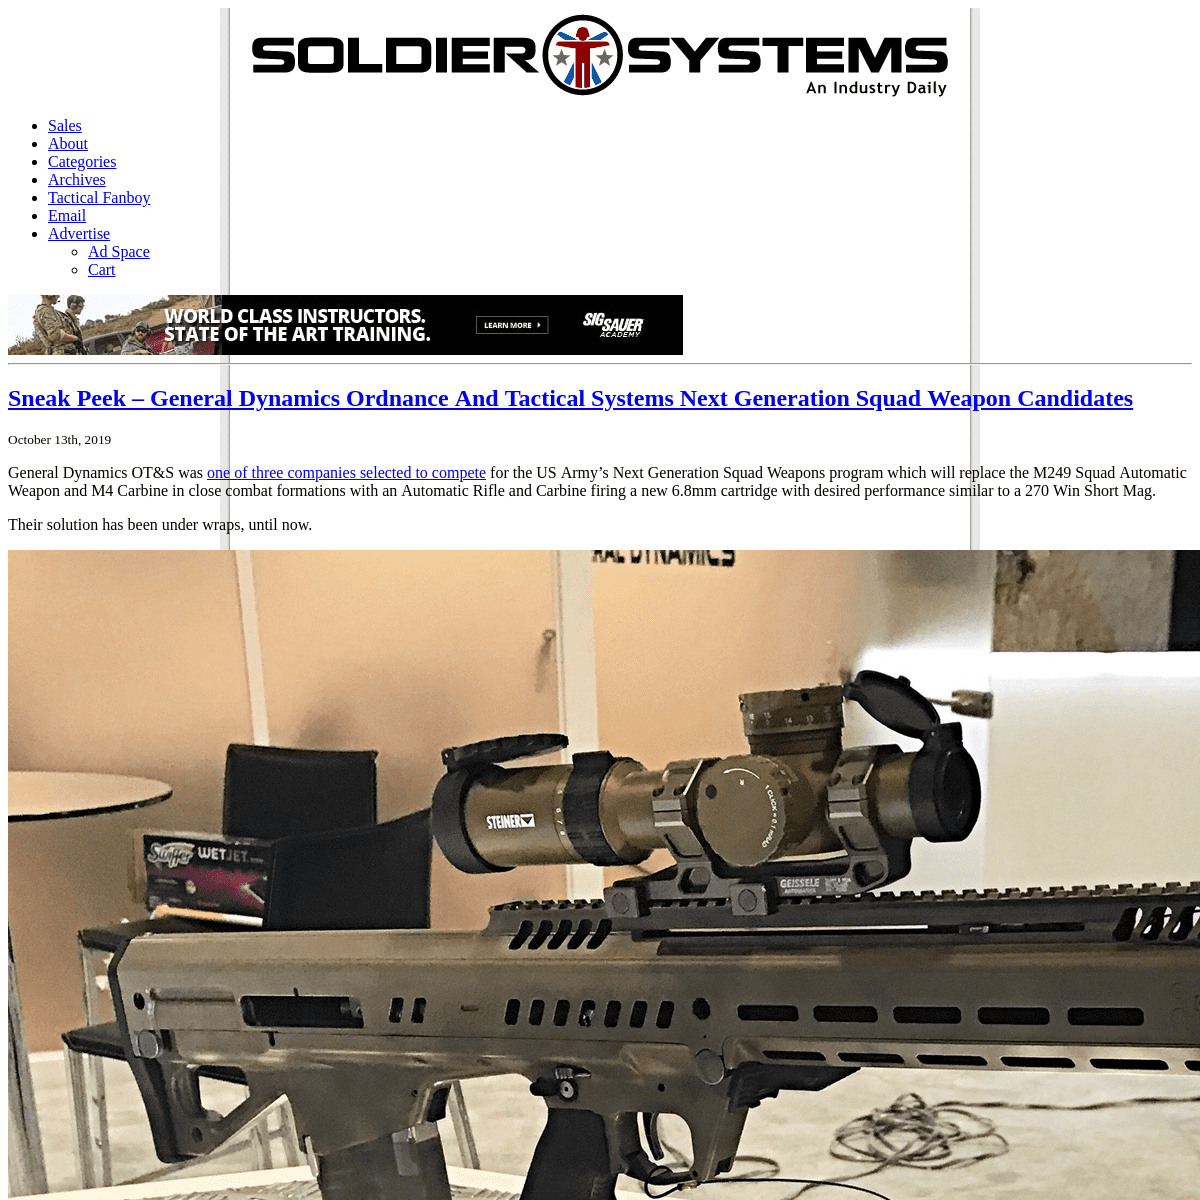 A complete backup of soldiersystems.net